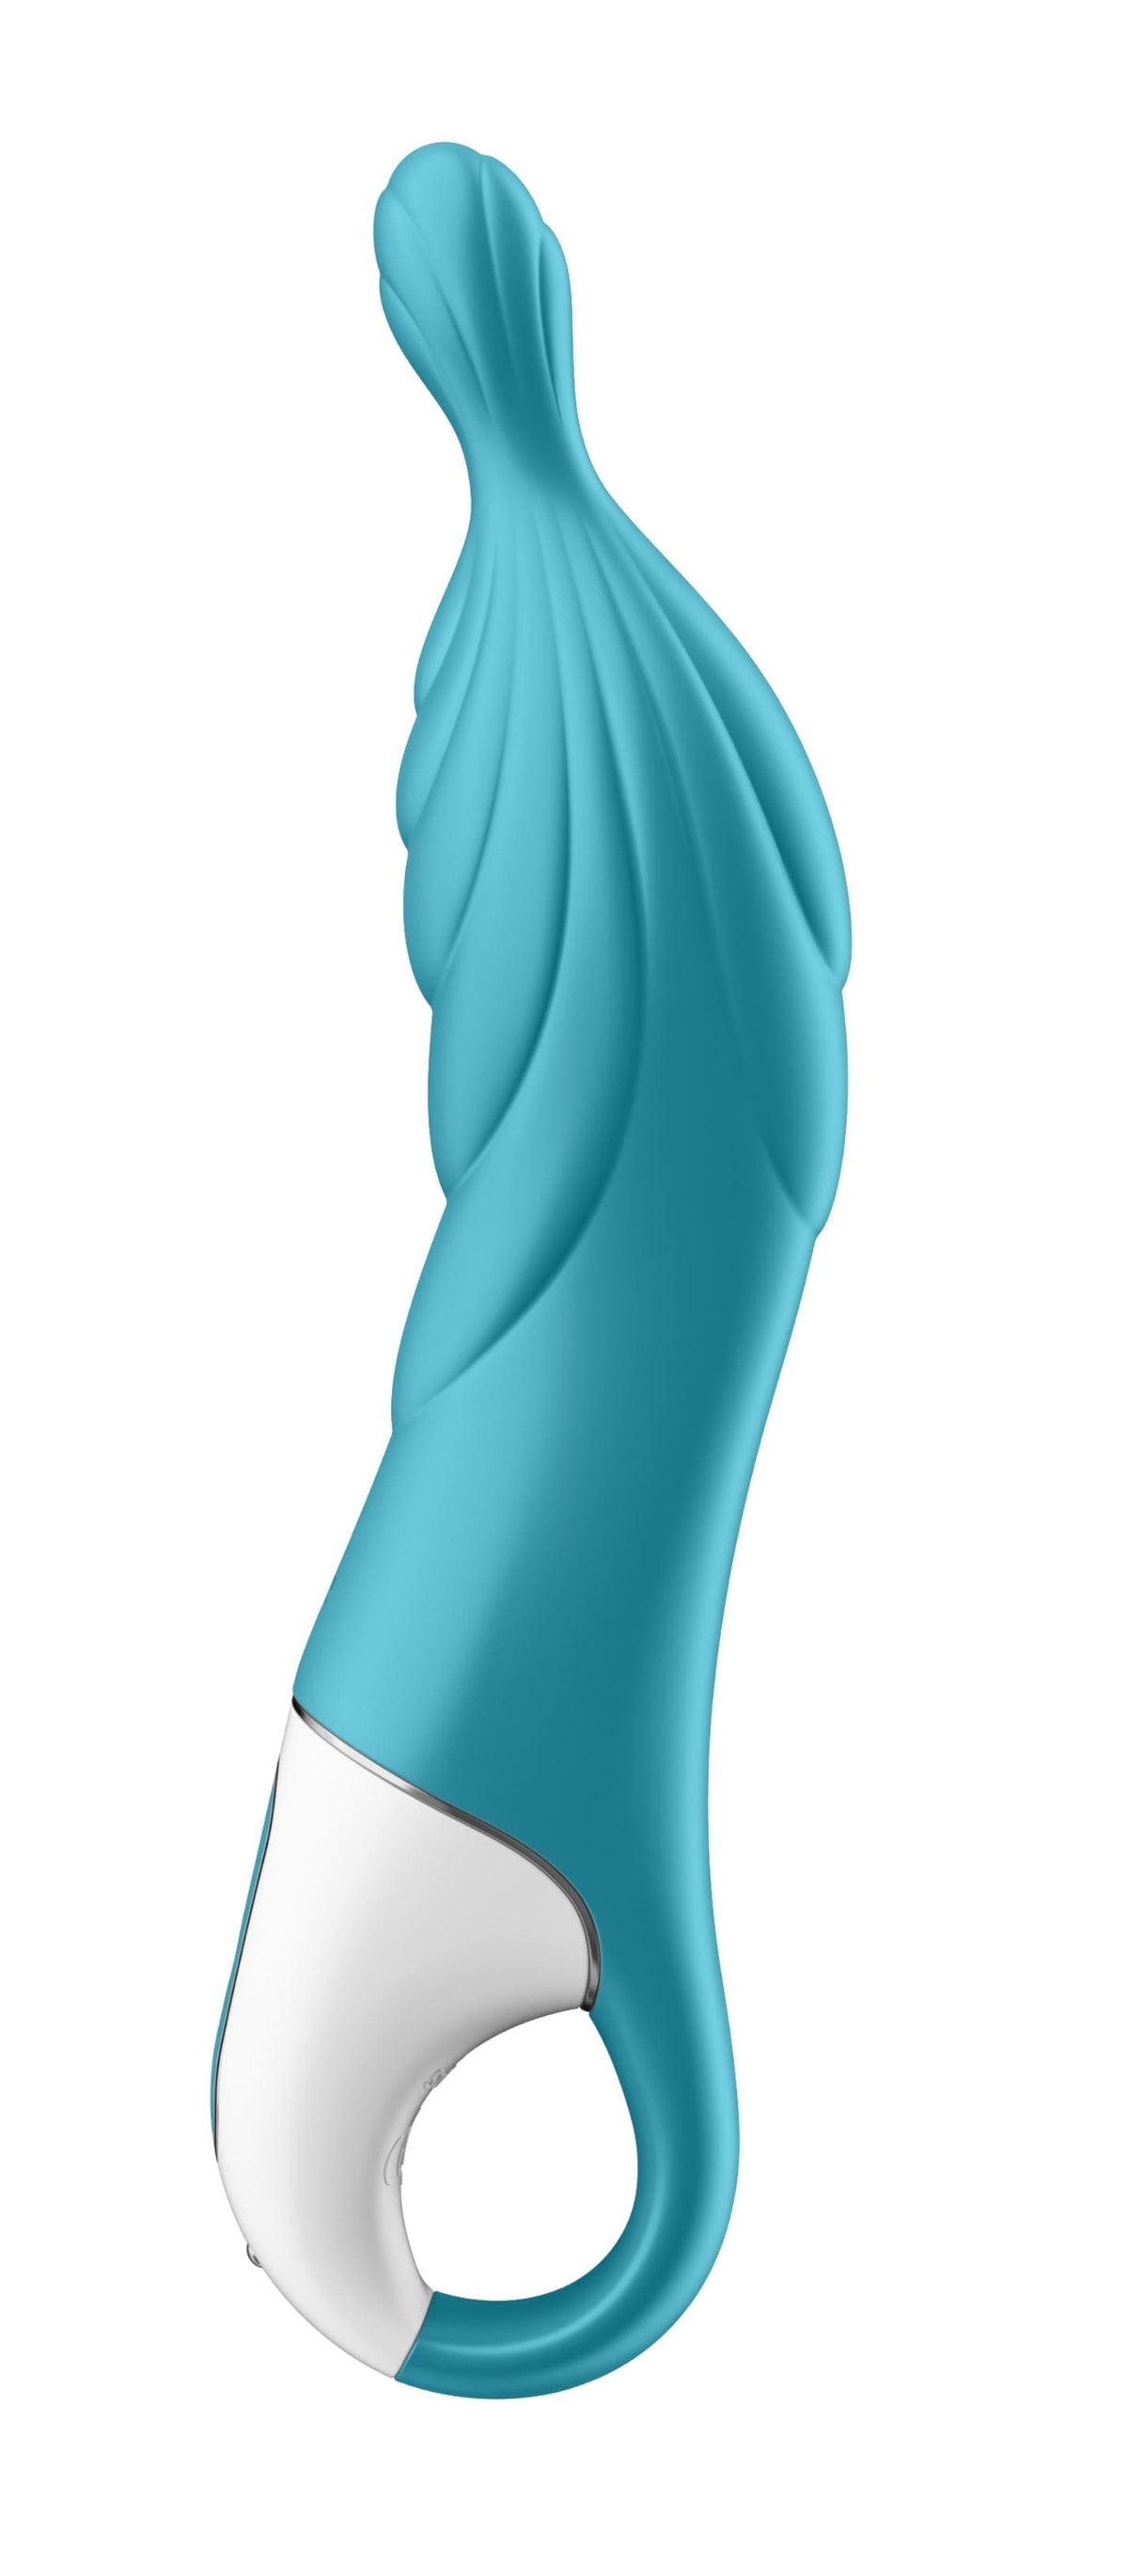 a mazing 2 a spot vibrator turquoise turquoise